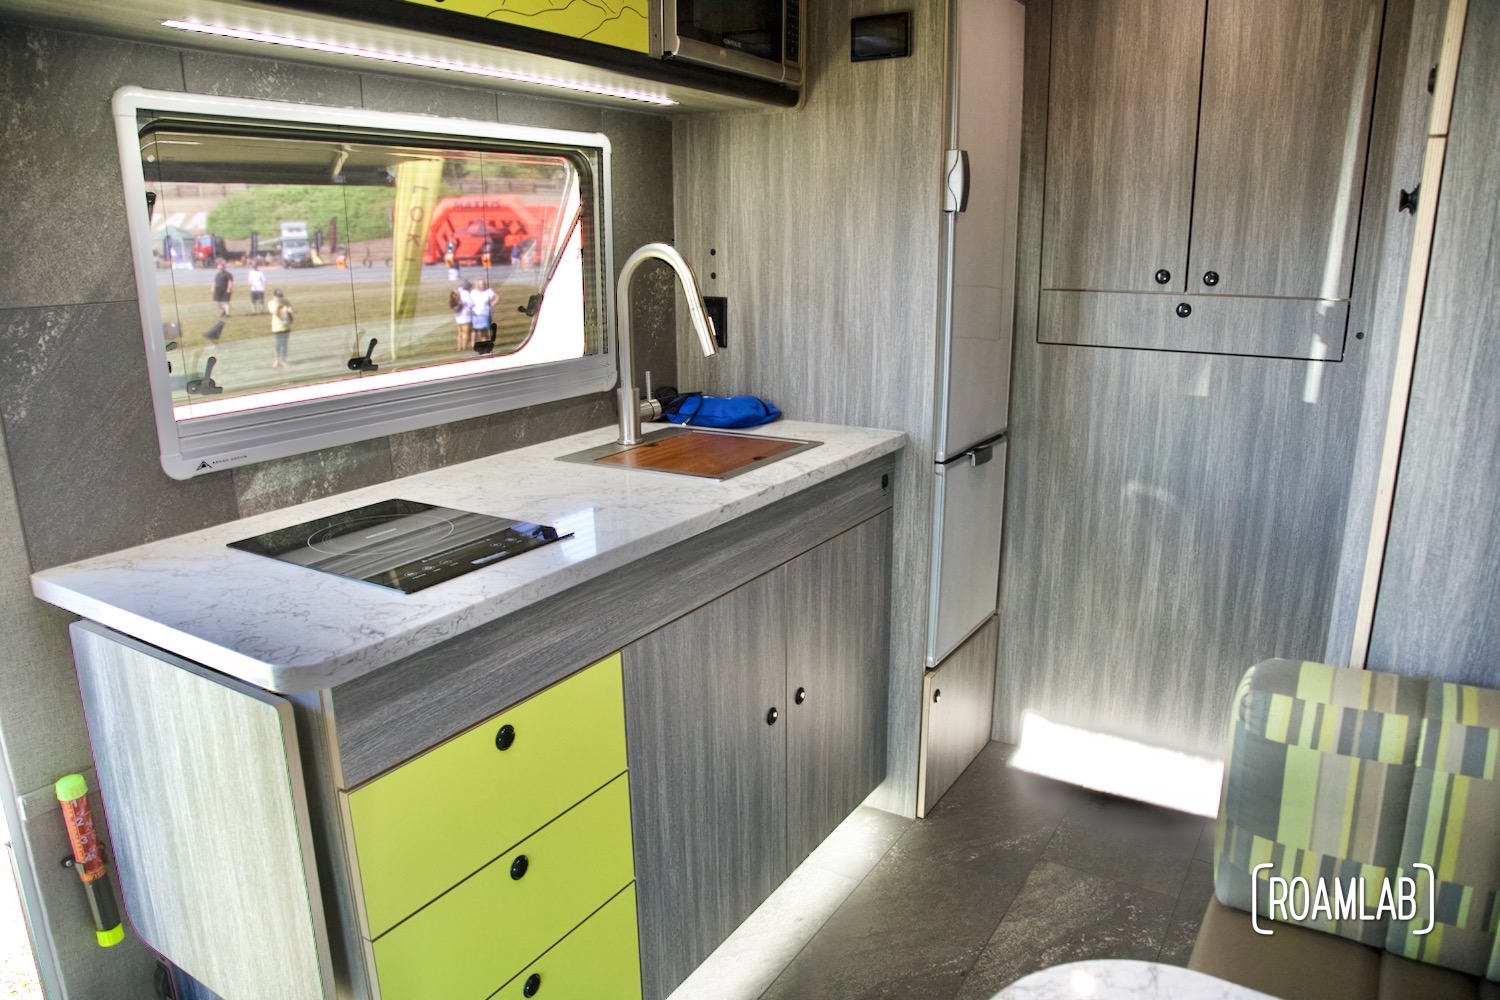 Grey and green camper kitchen interior on display.